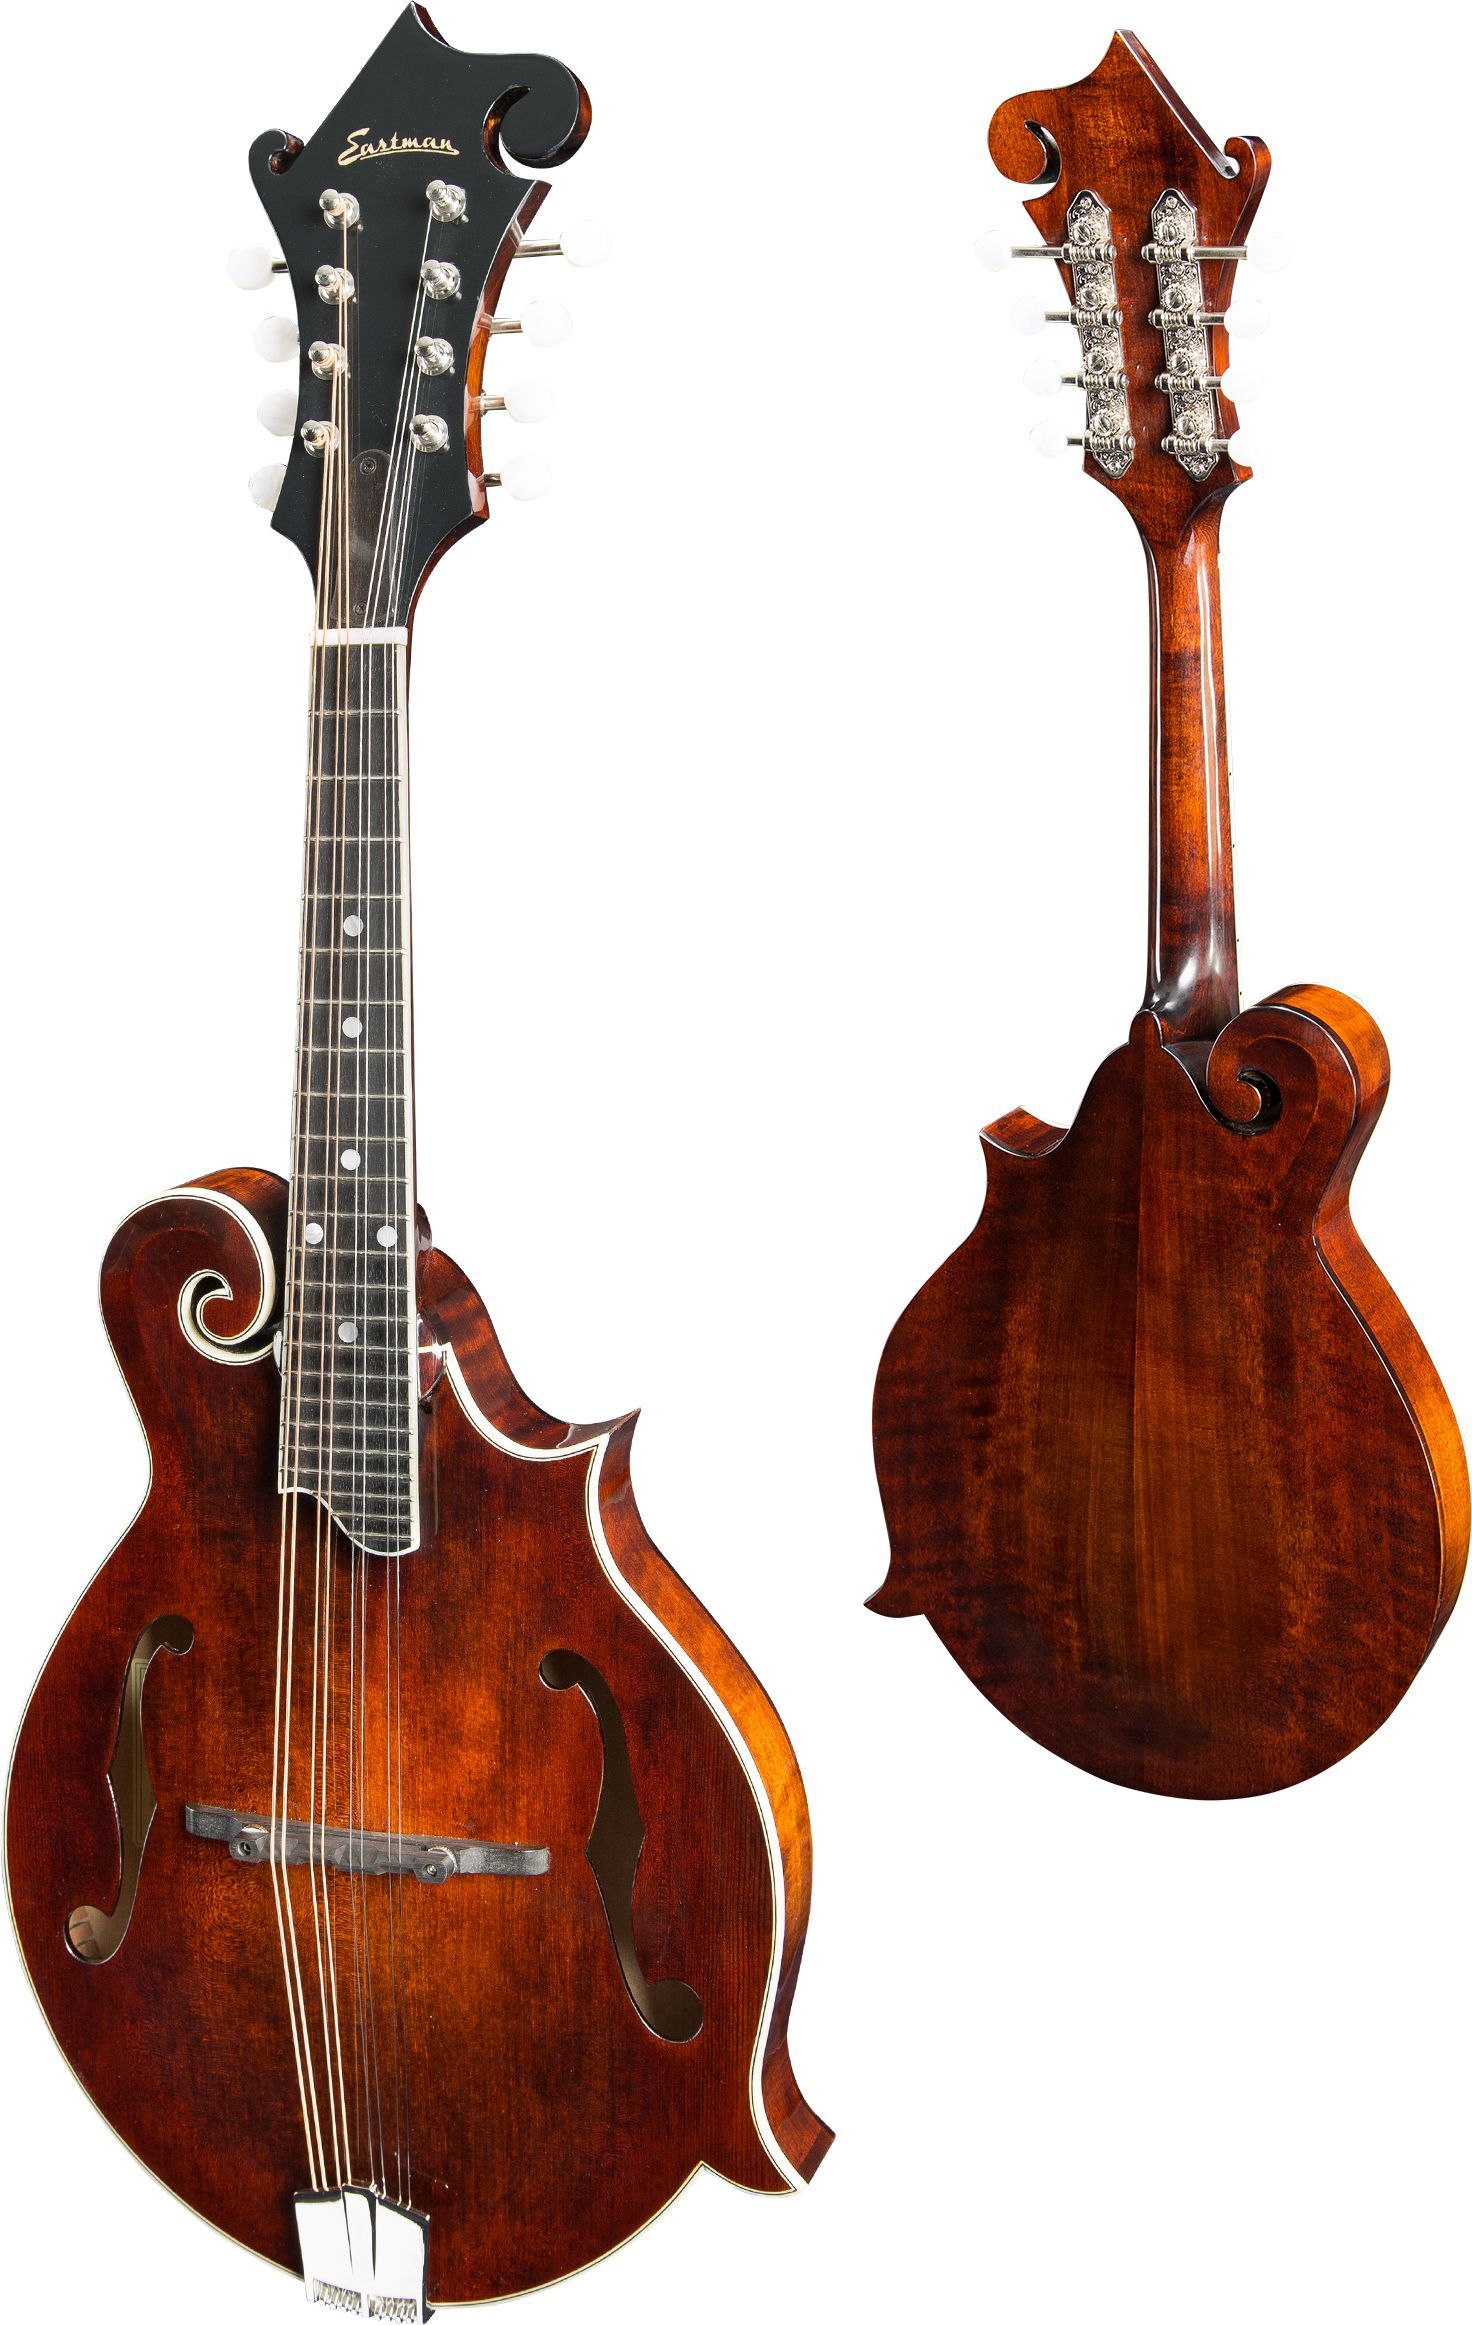 Eastman MD515 F-style F-holes Mandolin (Solid Spruce top, Solid Maple back and sides, w/Case), Mandolin for sale at Richards Guitars.